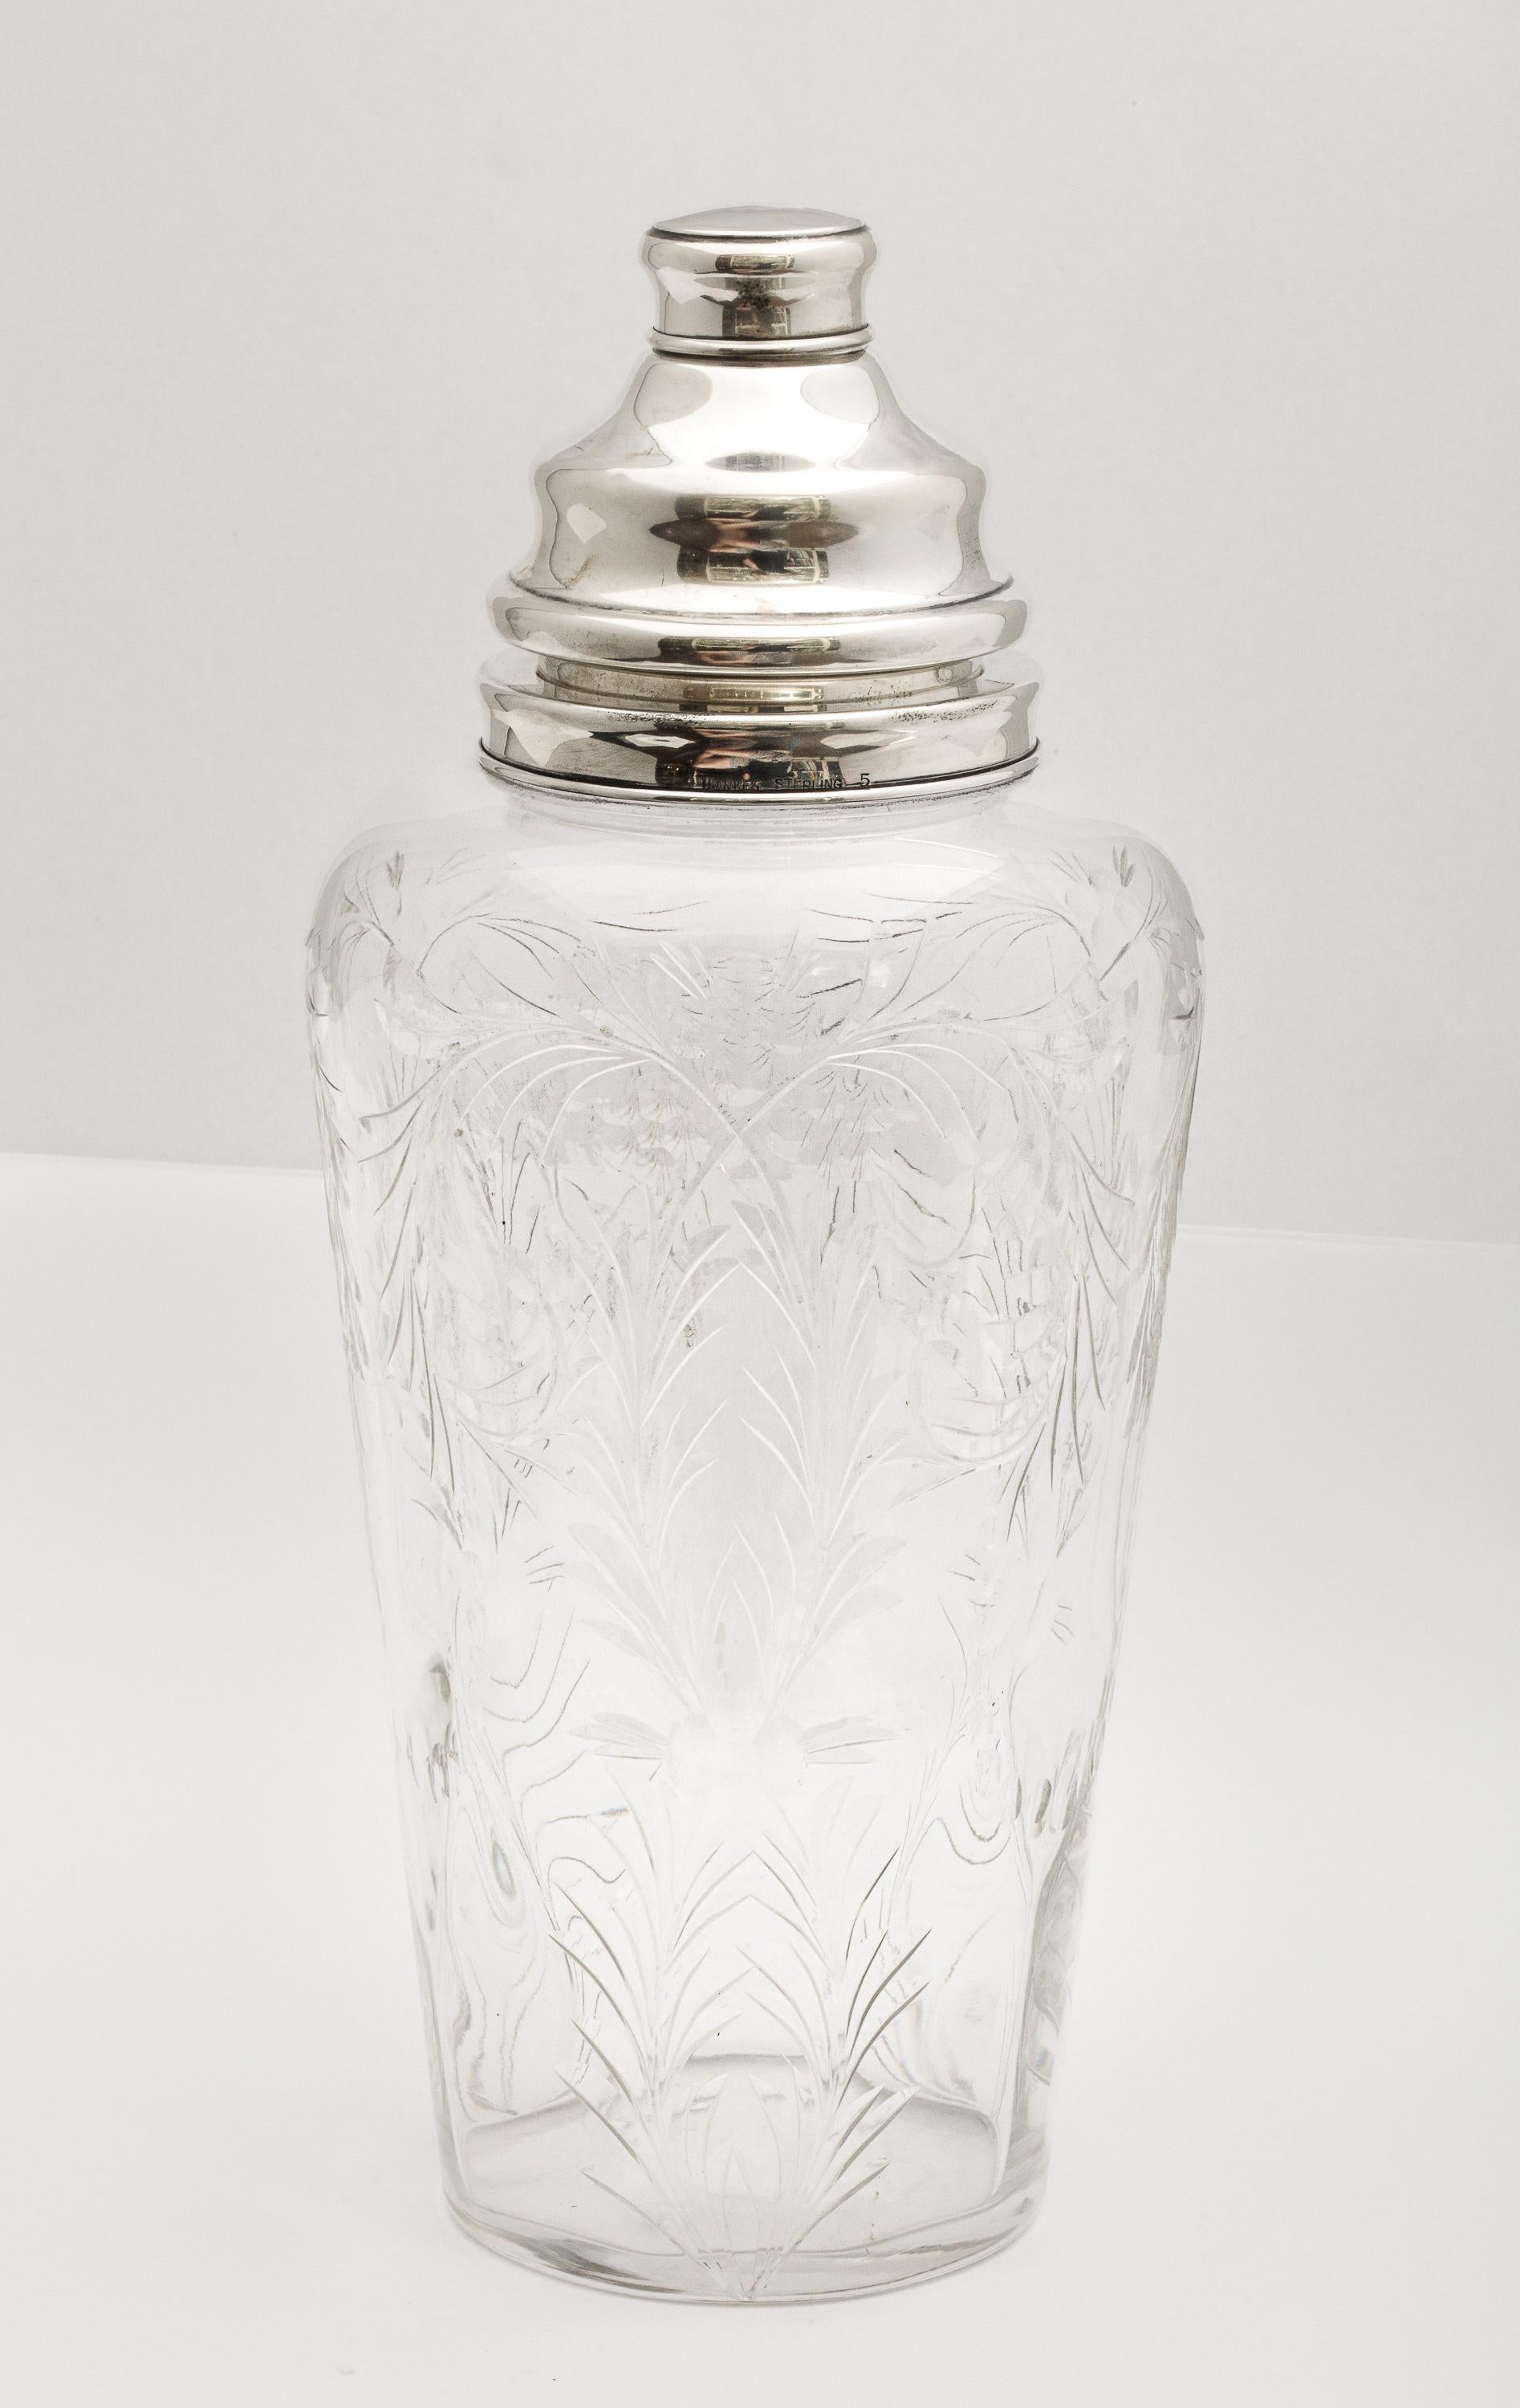 Art Deco, sterling silver-mounted, wheel cut glass cocktail shaker, T.G. Hawkes & Company, New York, Ca. 1930's. Measures 9 1/2 inches high (at highest point) x 5 inches diameter. Glass is signed with the company logo (three hawks) on underside of